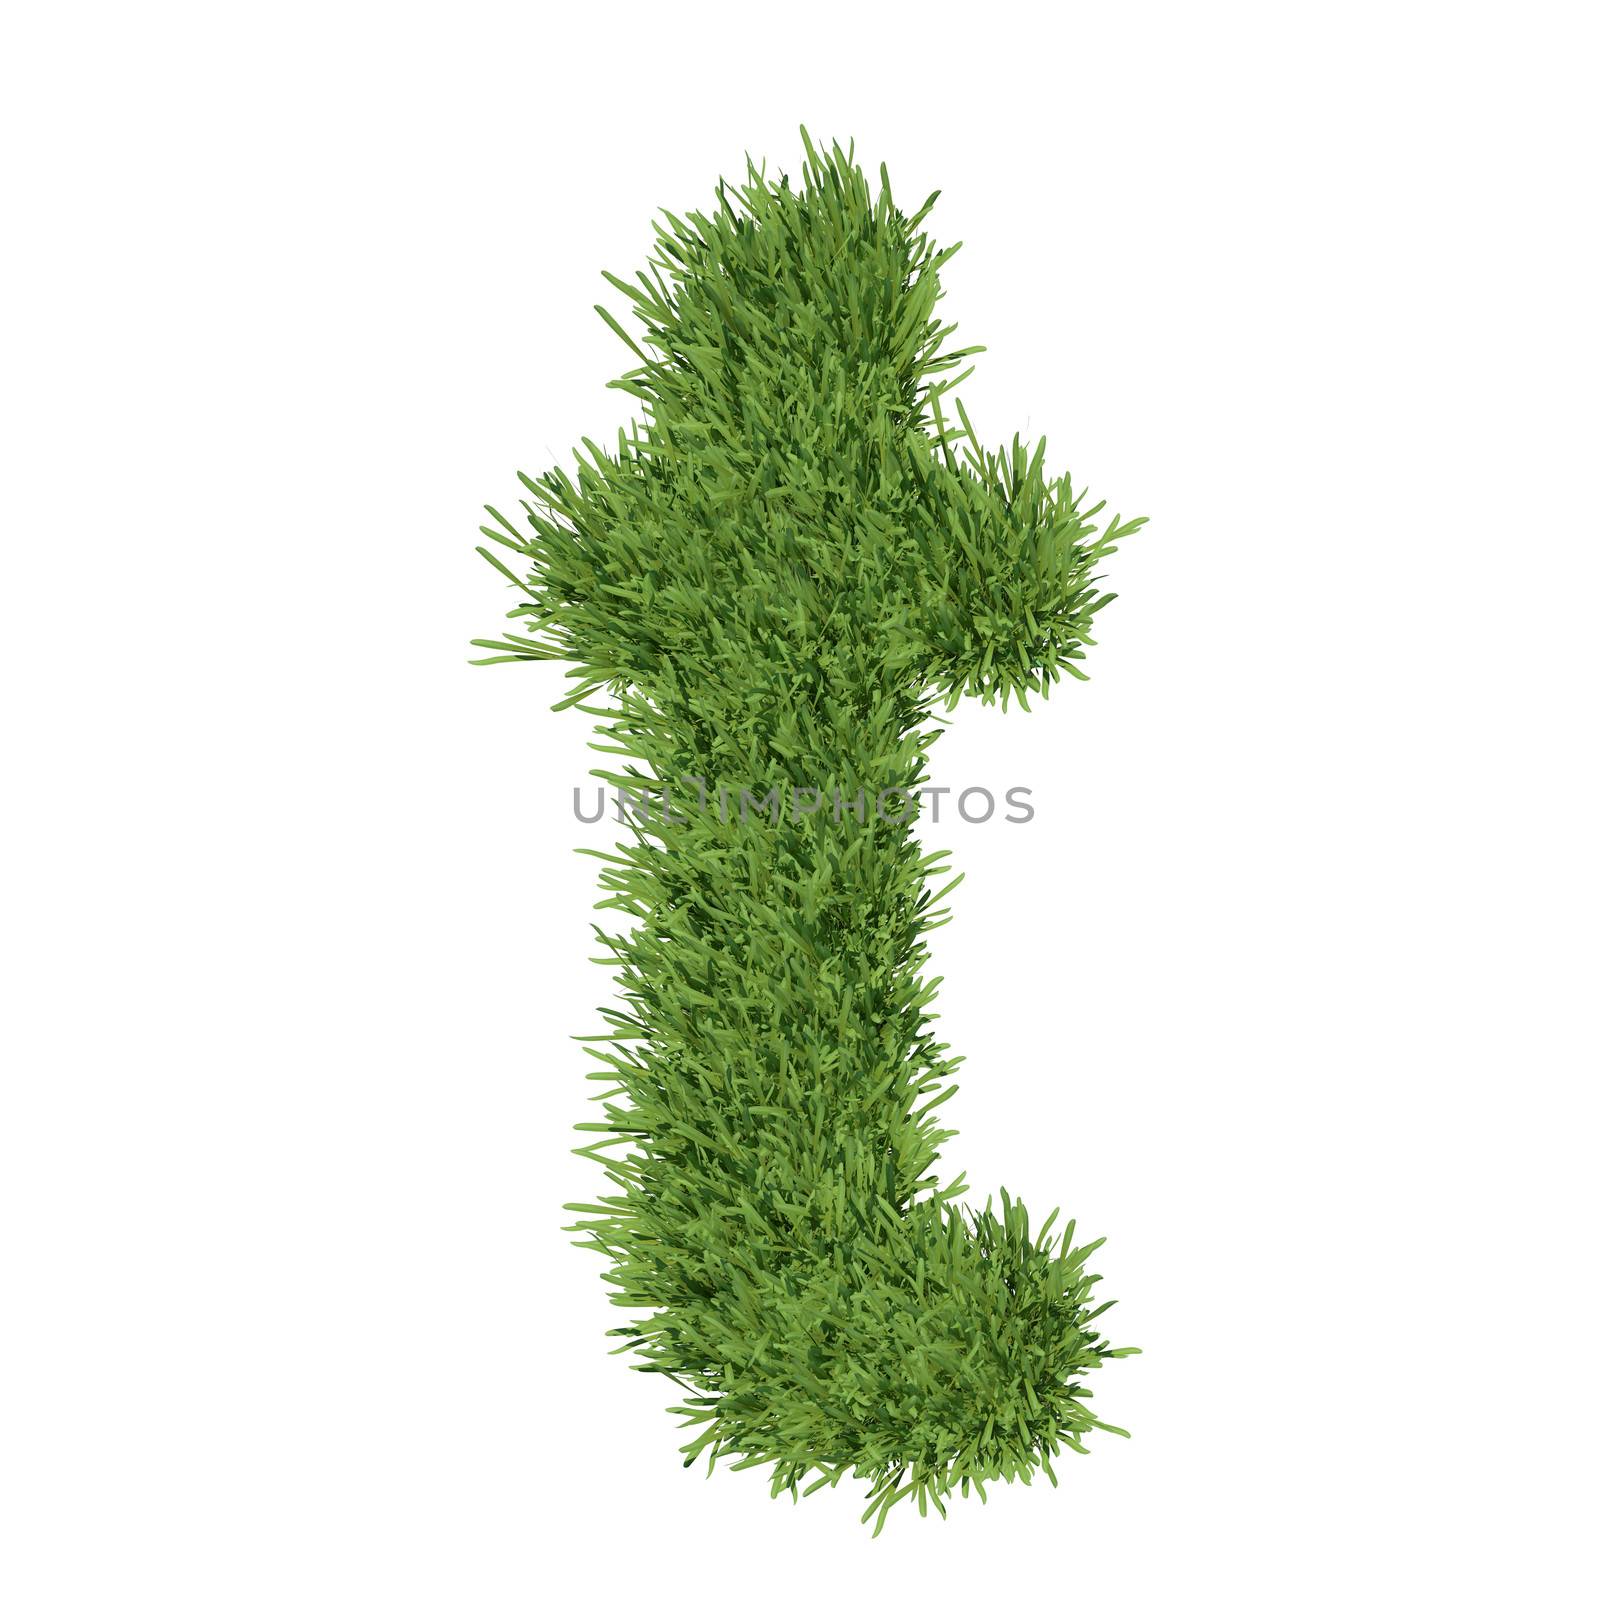 Letter of the alphabet made ​​from grass by cherezoff